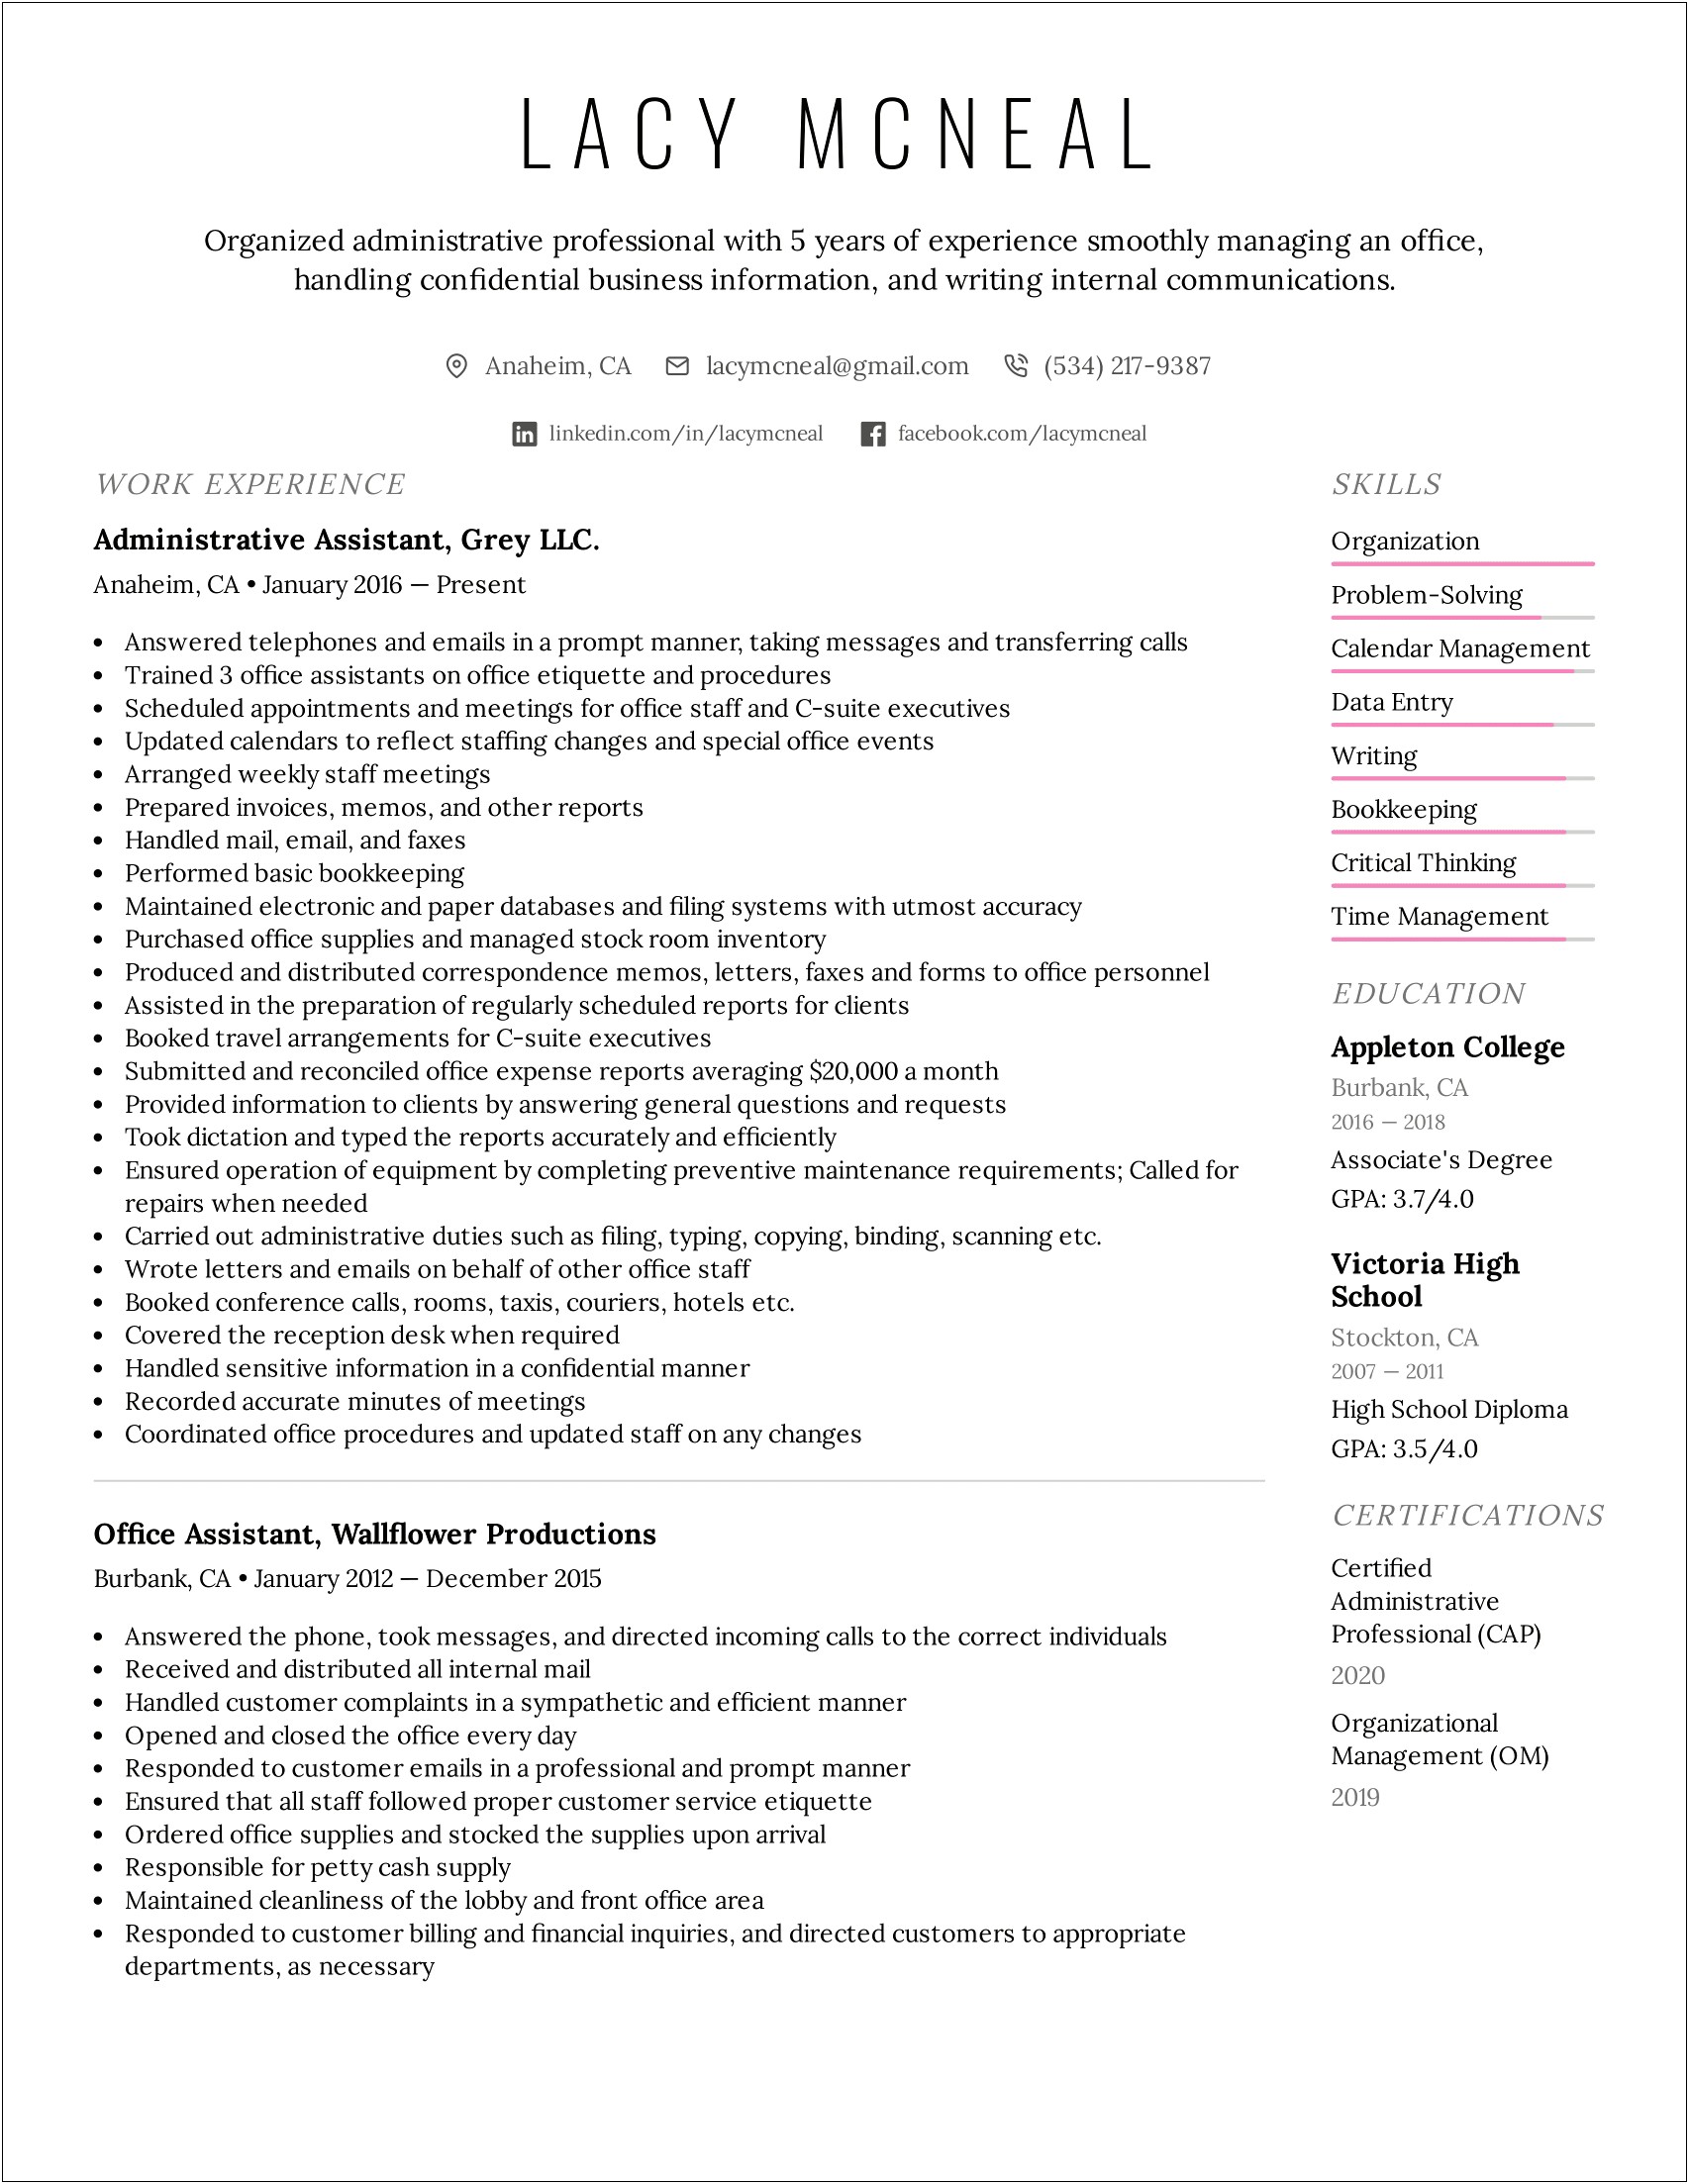 Functional Resume Skills For Assistant